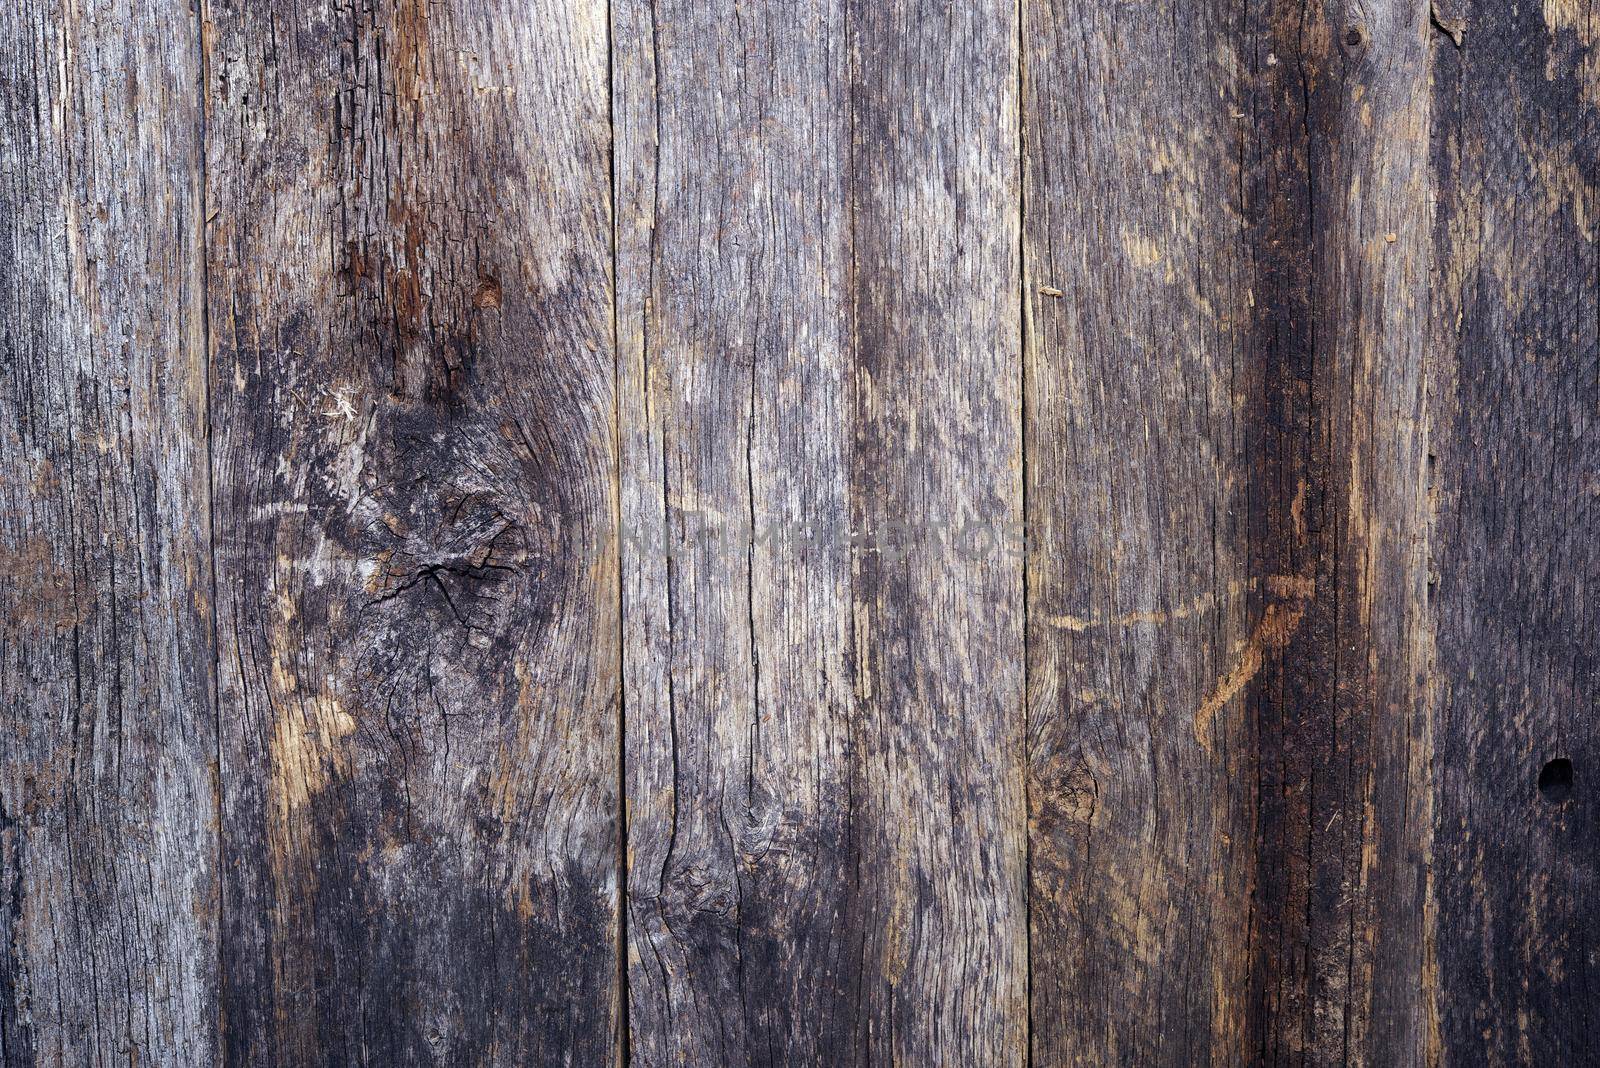 Aged Reclaimed Wood Background. Vertical Aged Planks. by welcomia